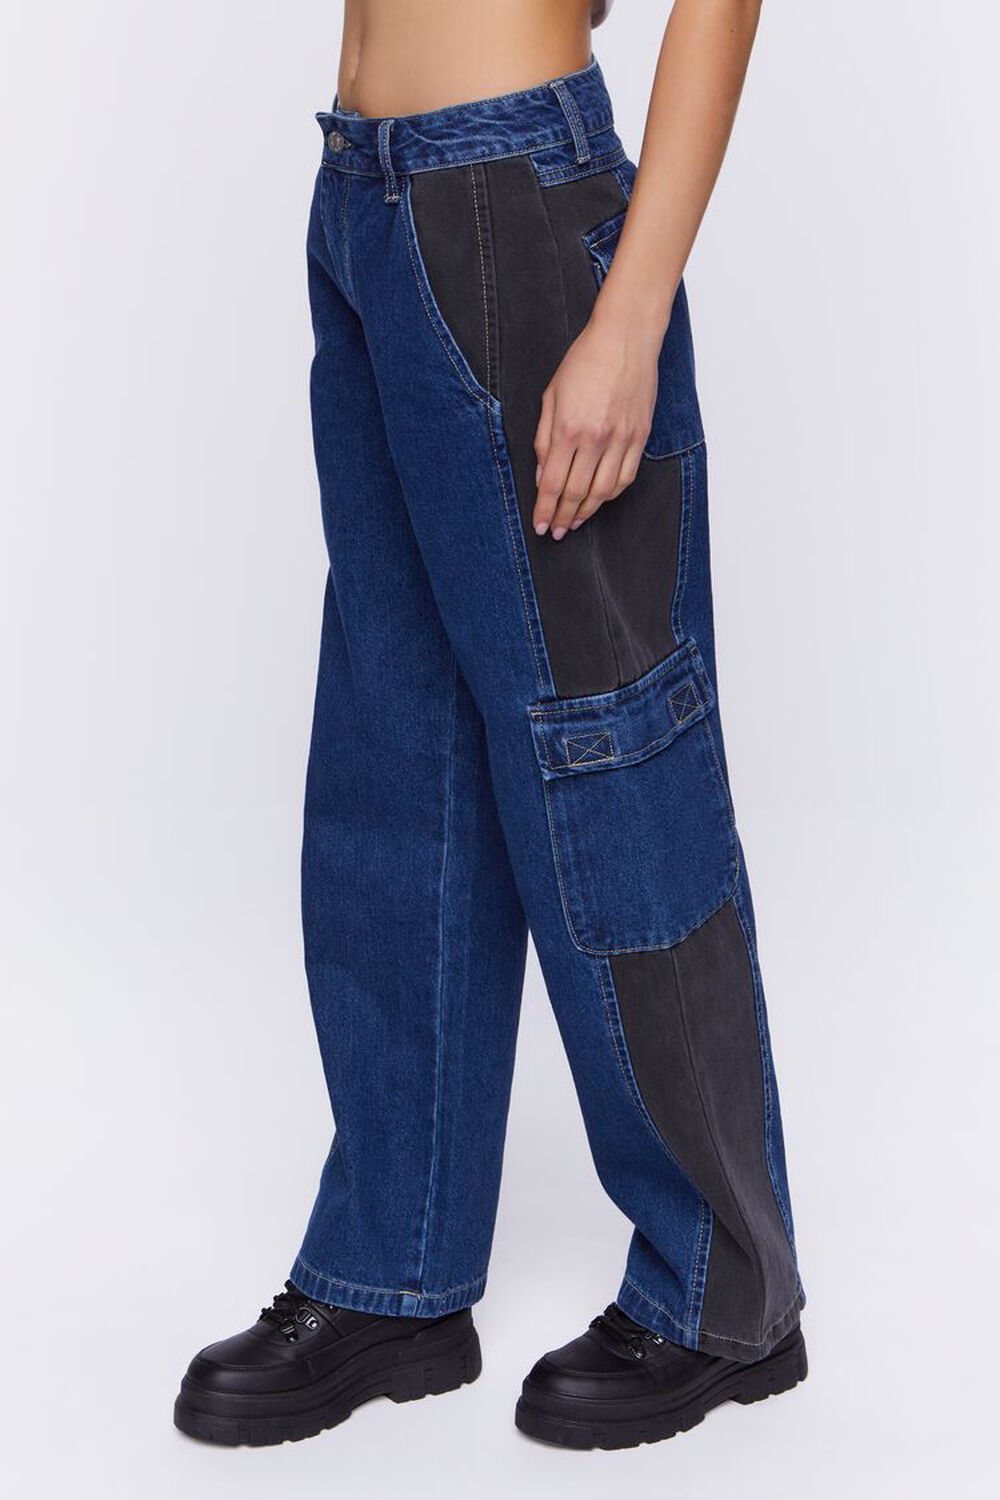 Contrast-Panel High-Rise Dad Jeans, image 2